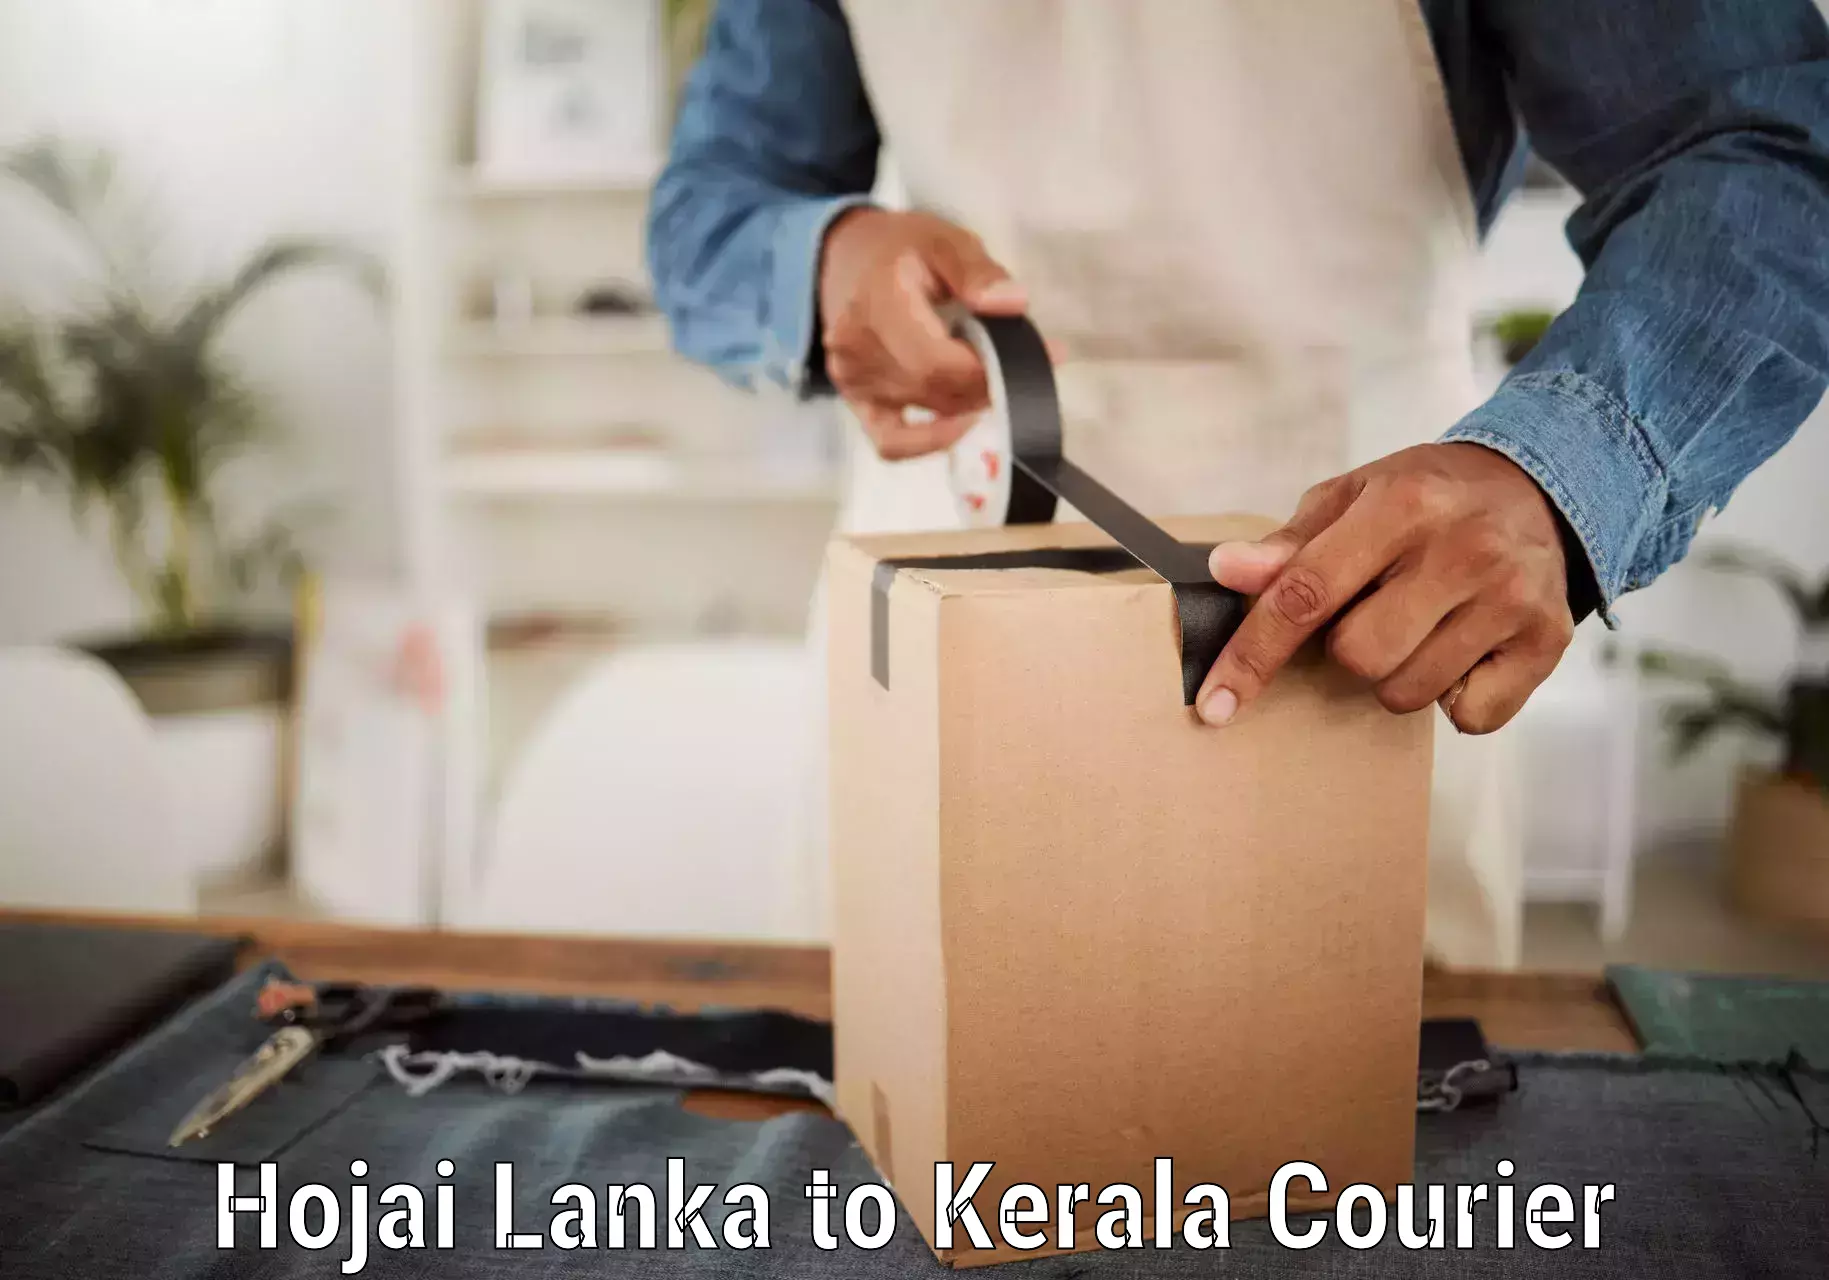 Medical delivery services in Hojai Lanka to Kerala